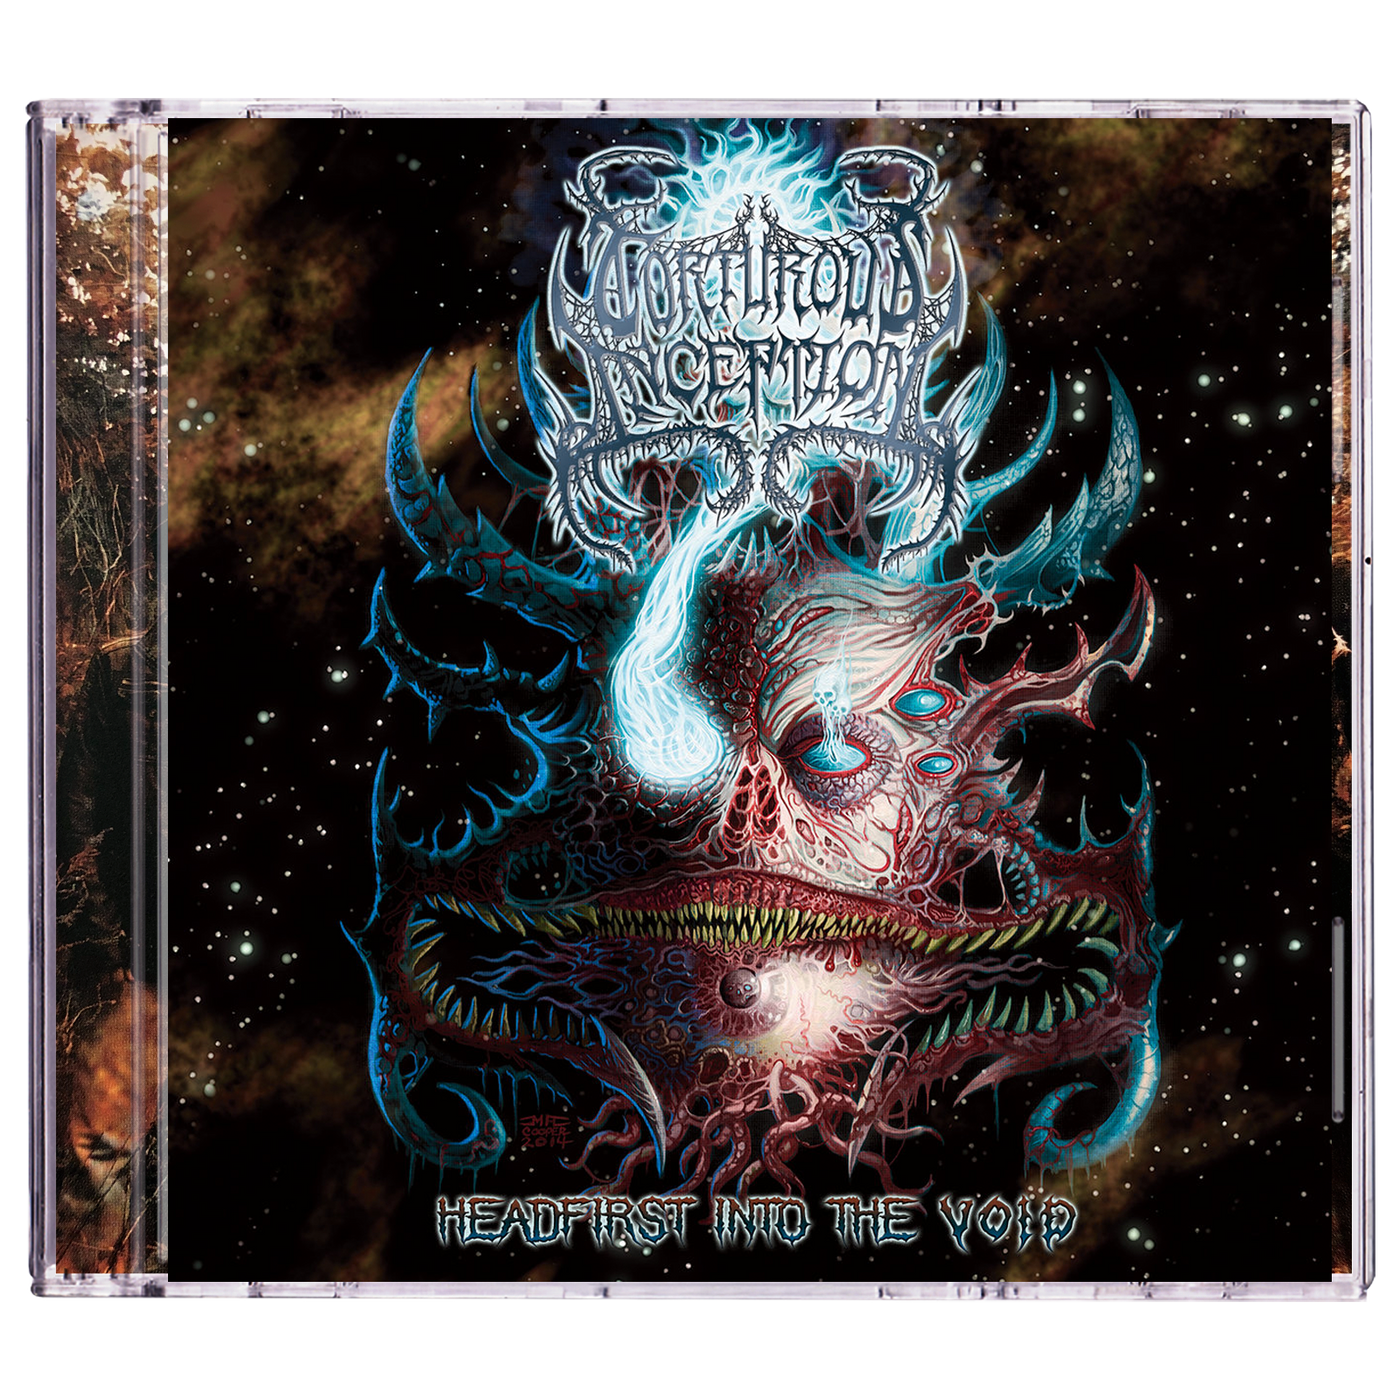 Torturous Inception 'Headfirst Into The Void' CD